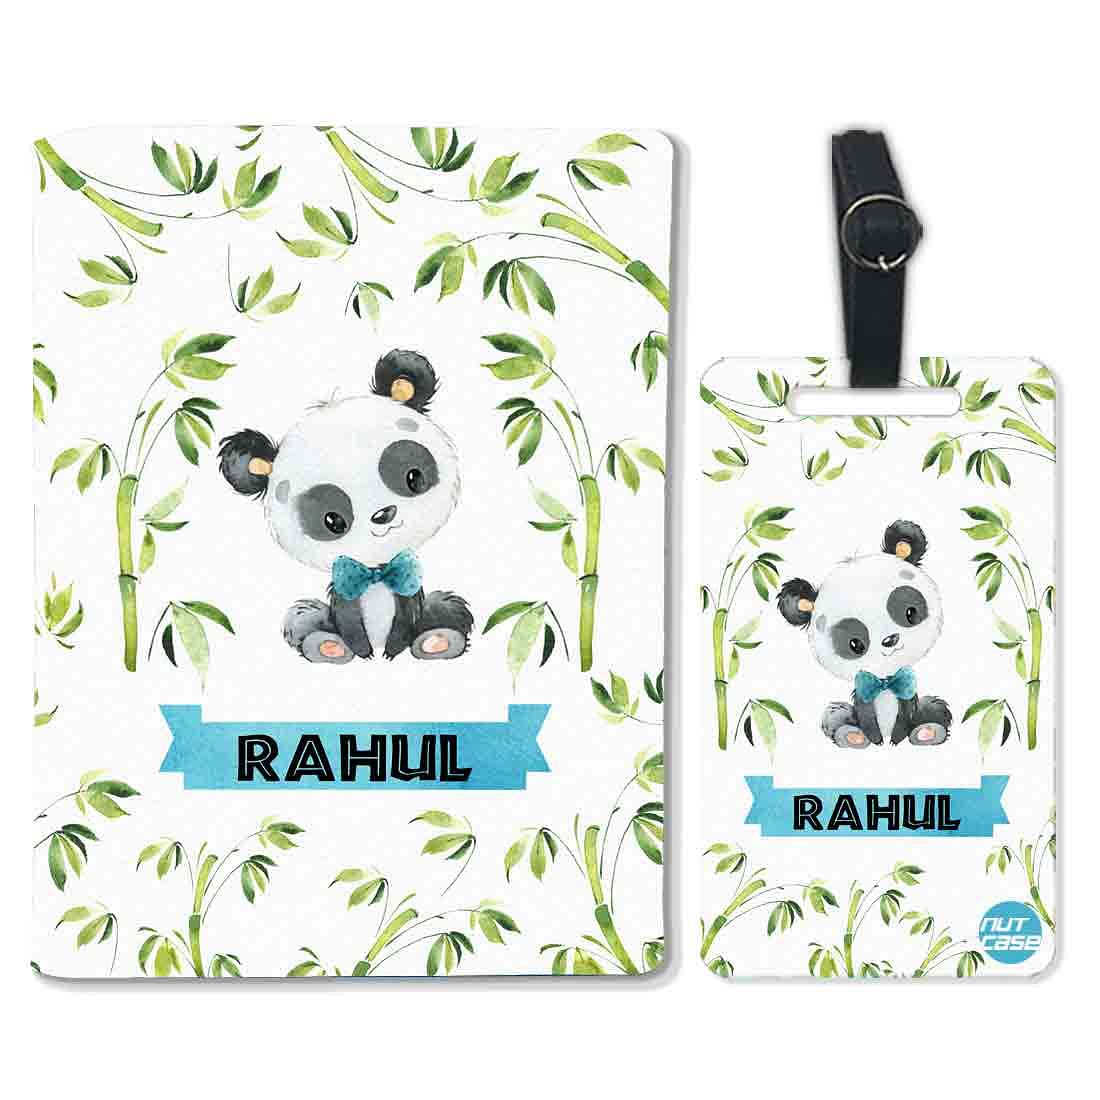 Personalized Passport Cover Holder Travel Case With Luggage Tag -  Cute Small Panda Nutcase